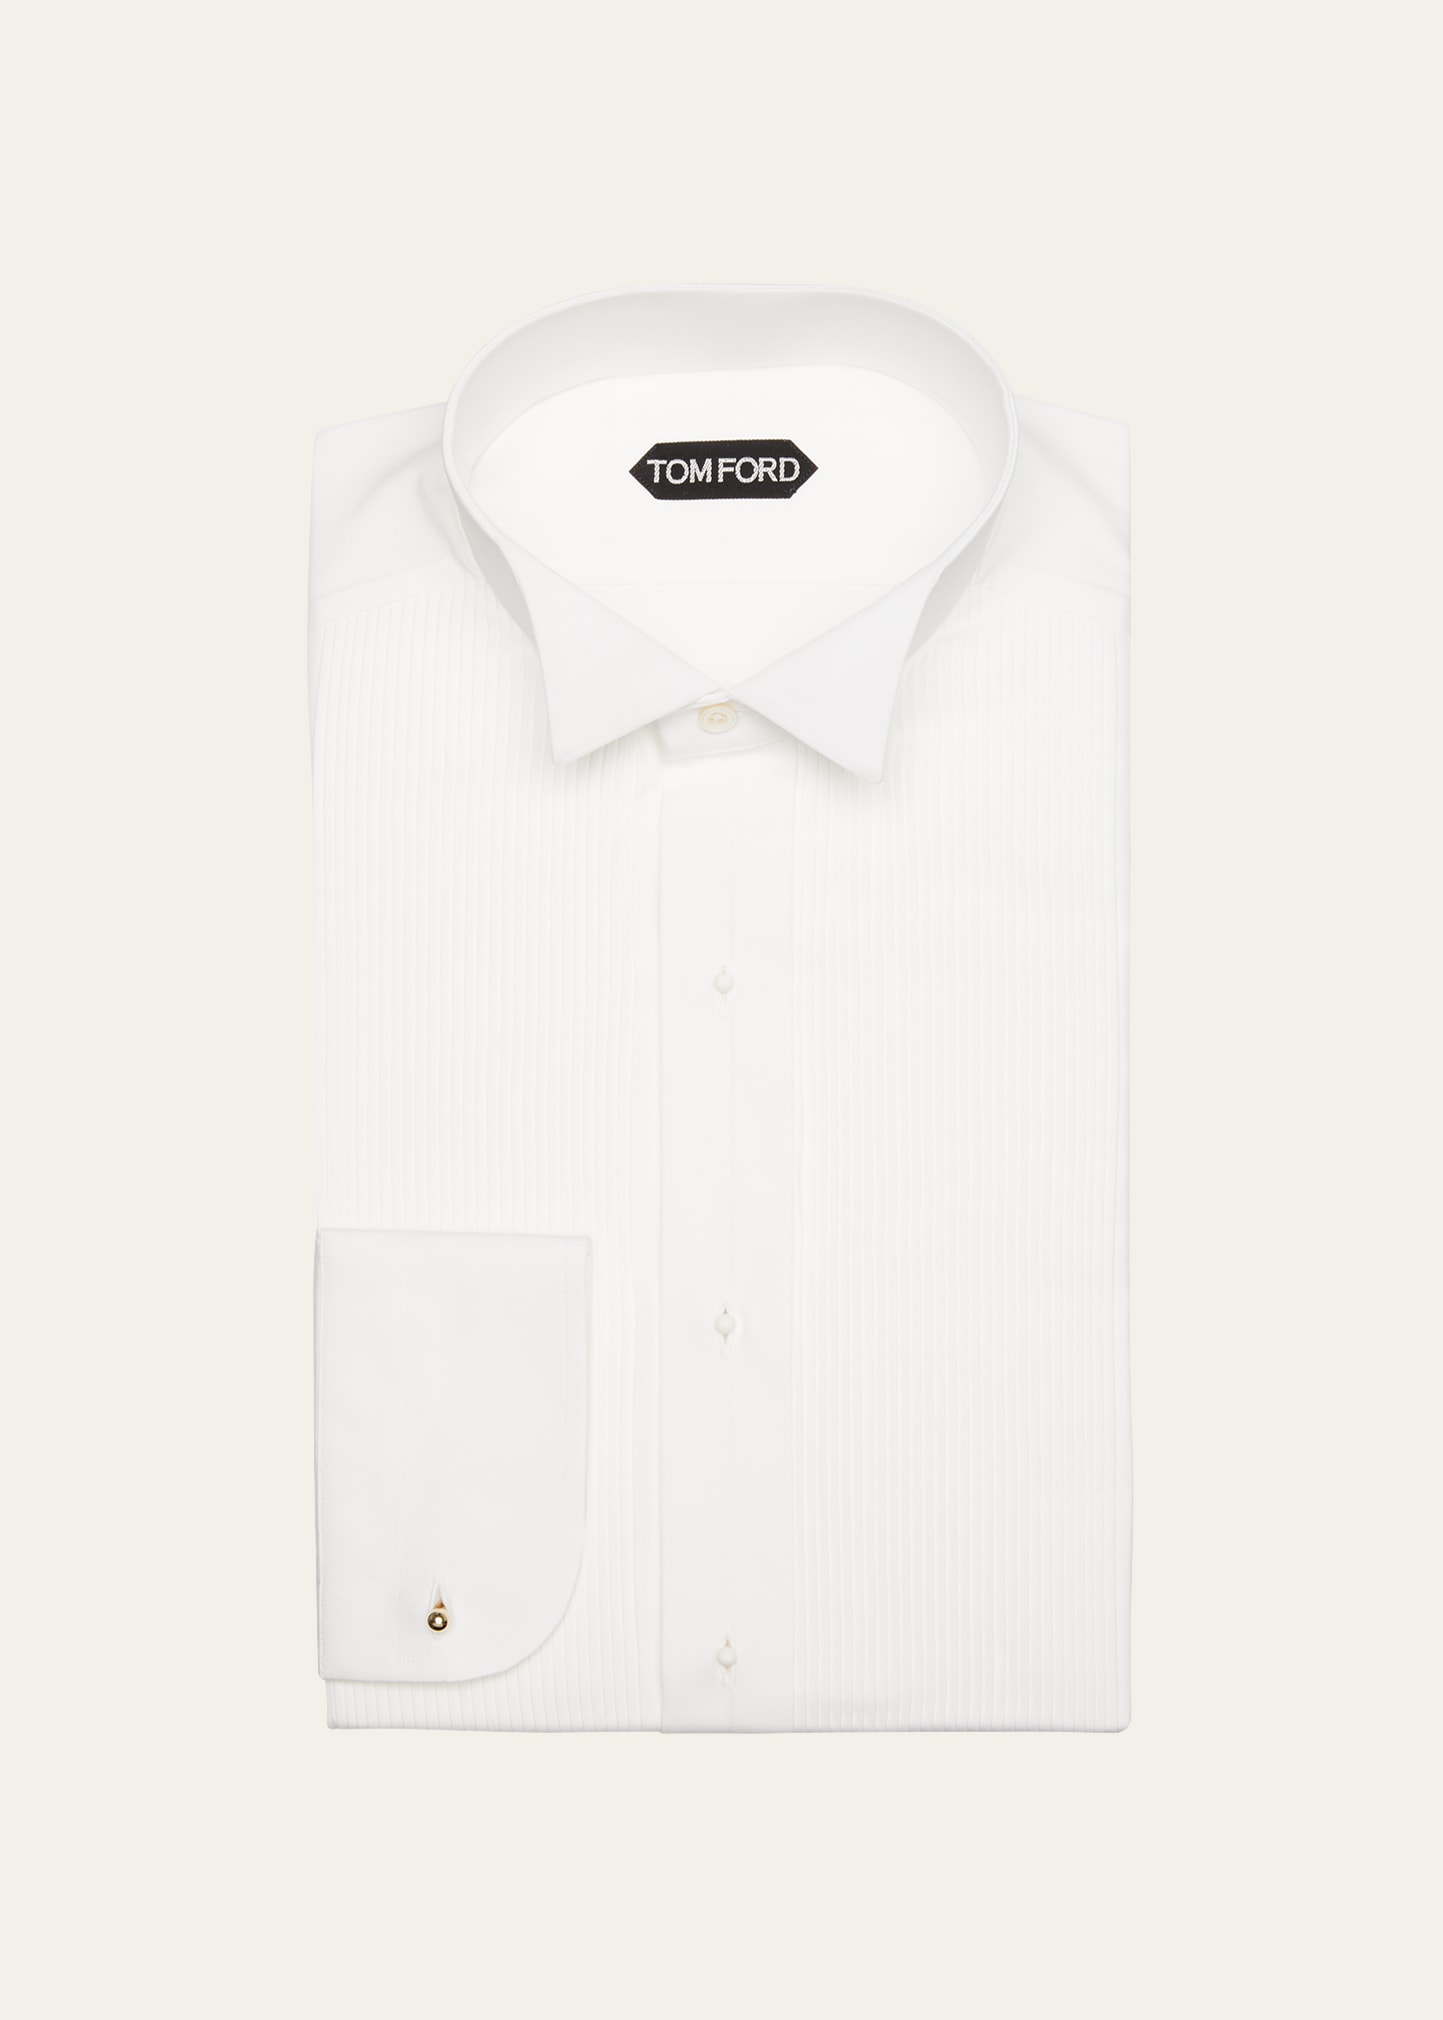 Tom Ford Men's Cotton Piqué Dress Shirt With French Cuffs In White